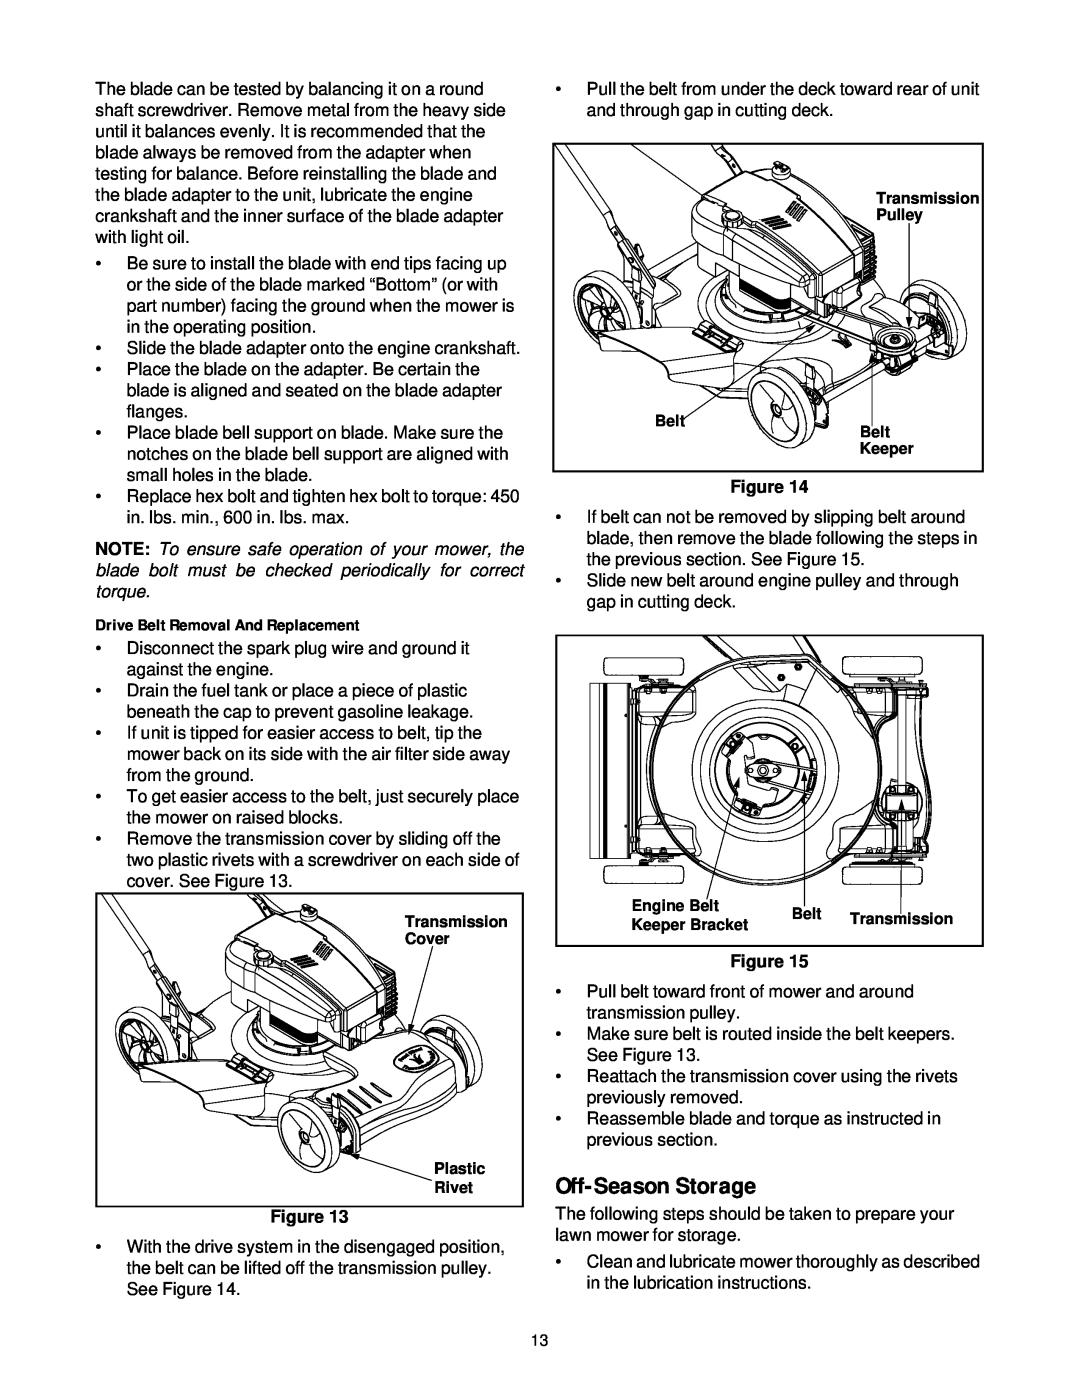 MTD 260 Thru 279 manual Off-Season Storage, Drive Belt Removal And Replacement 